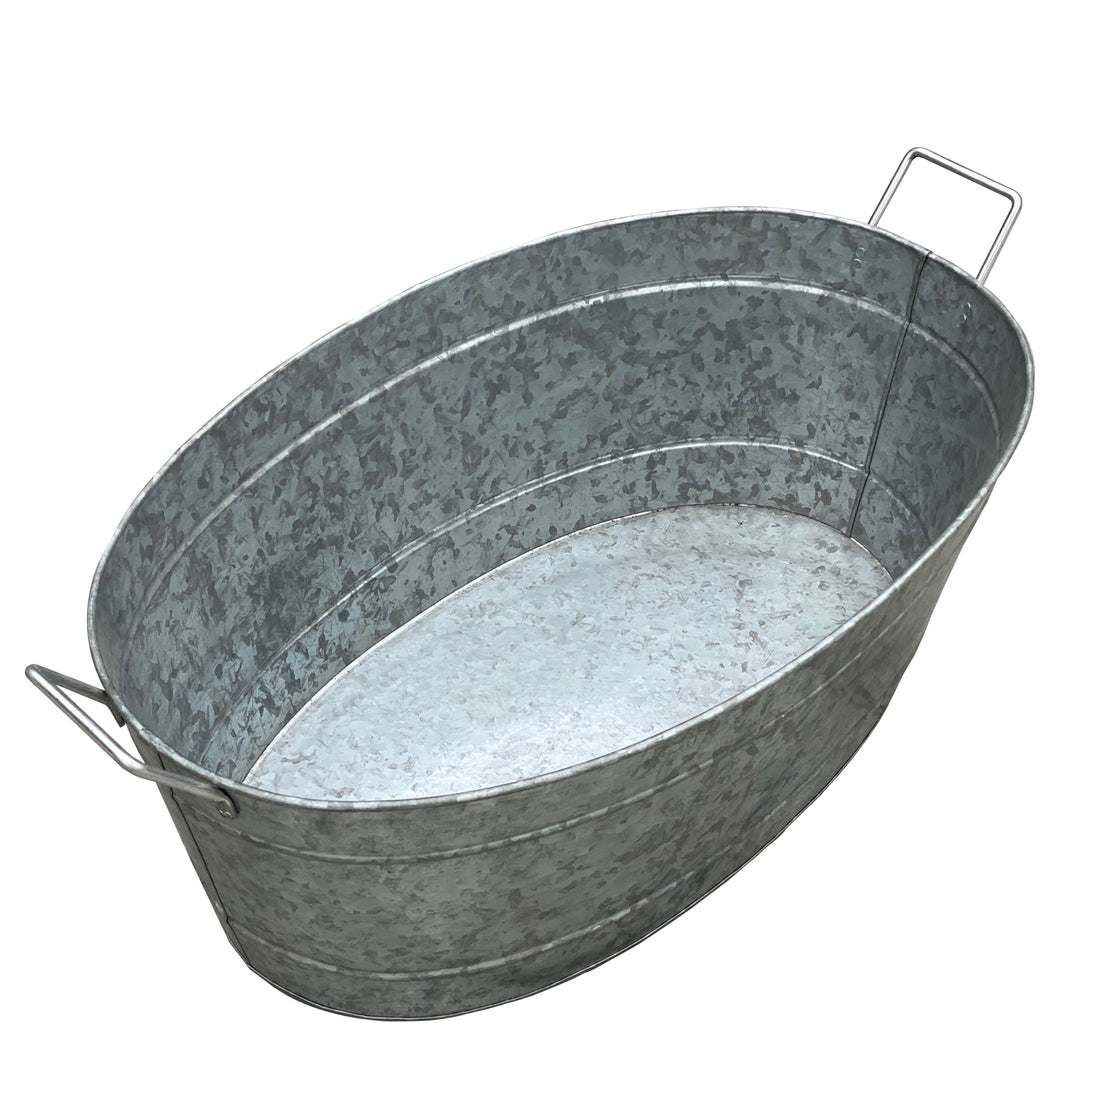 Embossed Design Oval Shape Galvanized Steel Tub with antique silver-steel